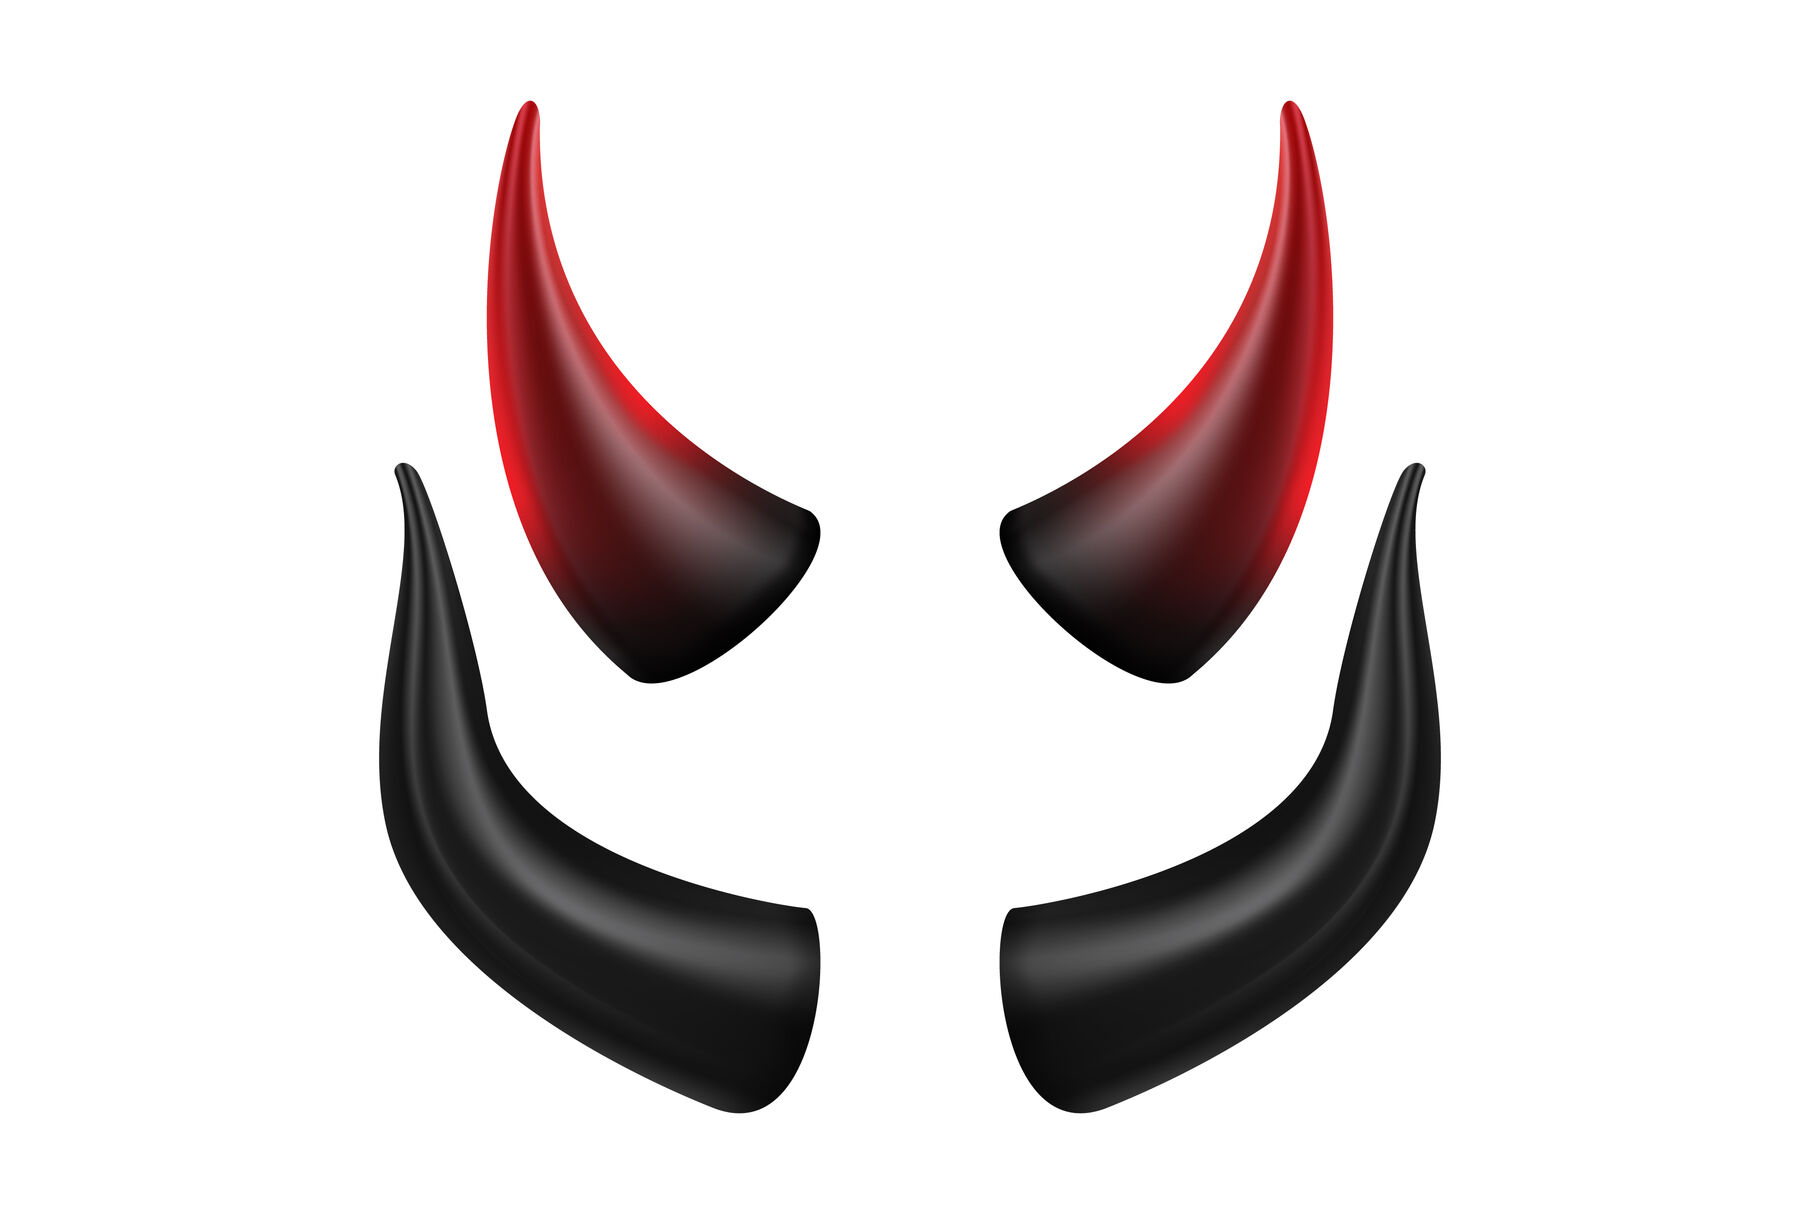 Devils Horns Vector Good For Halloween Party Satan Horns Symbol Isolated Illustration By 